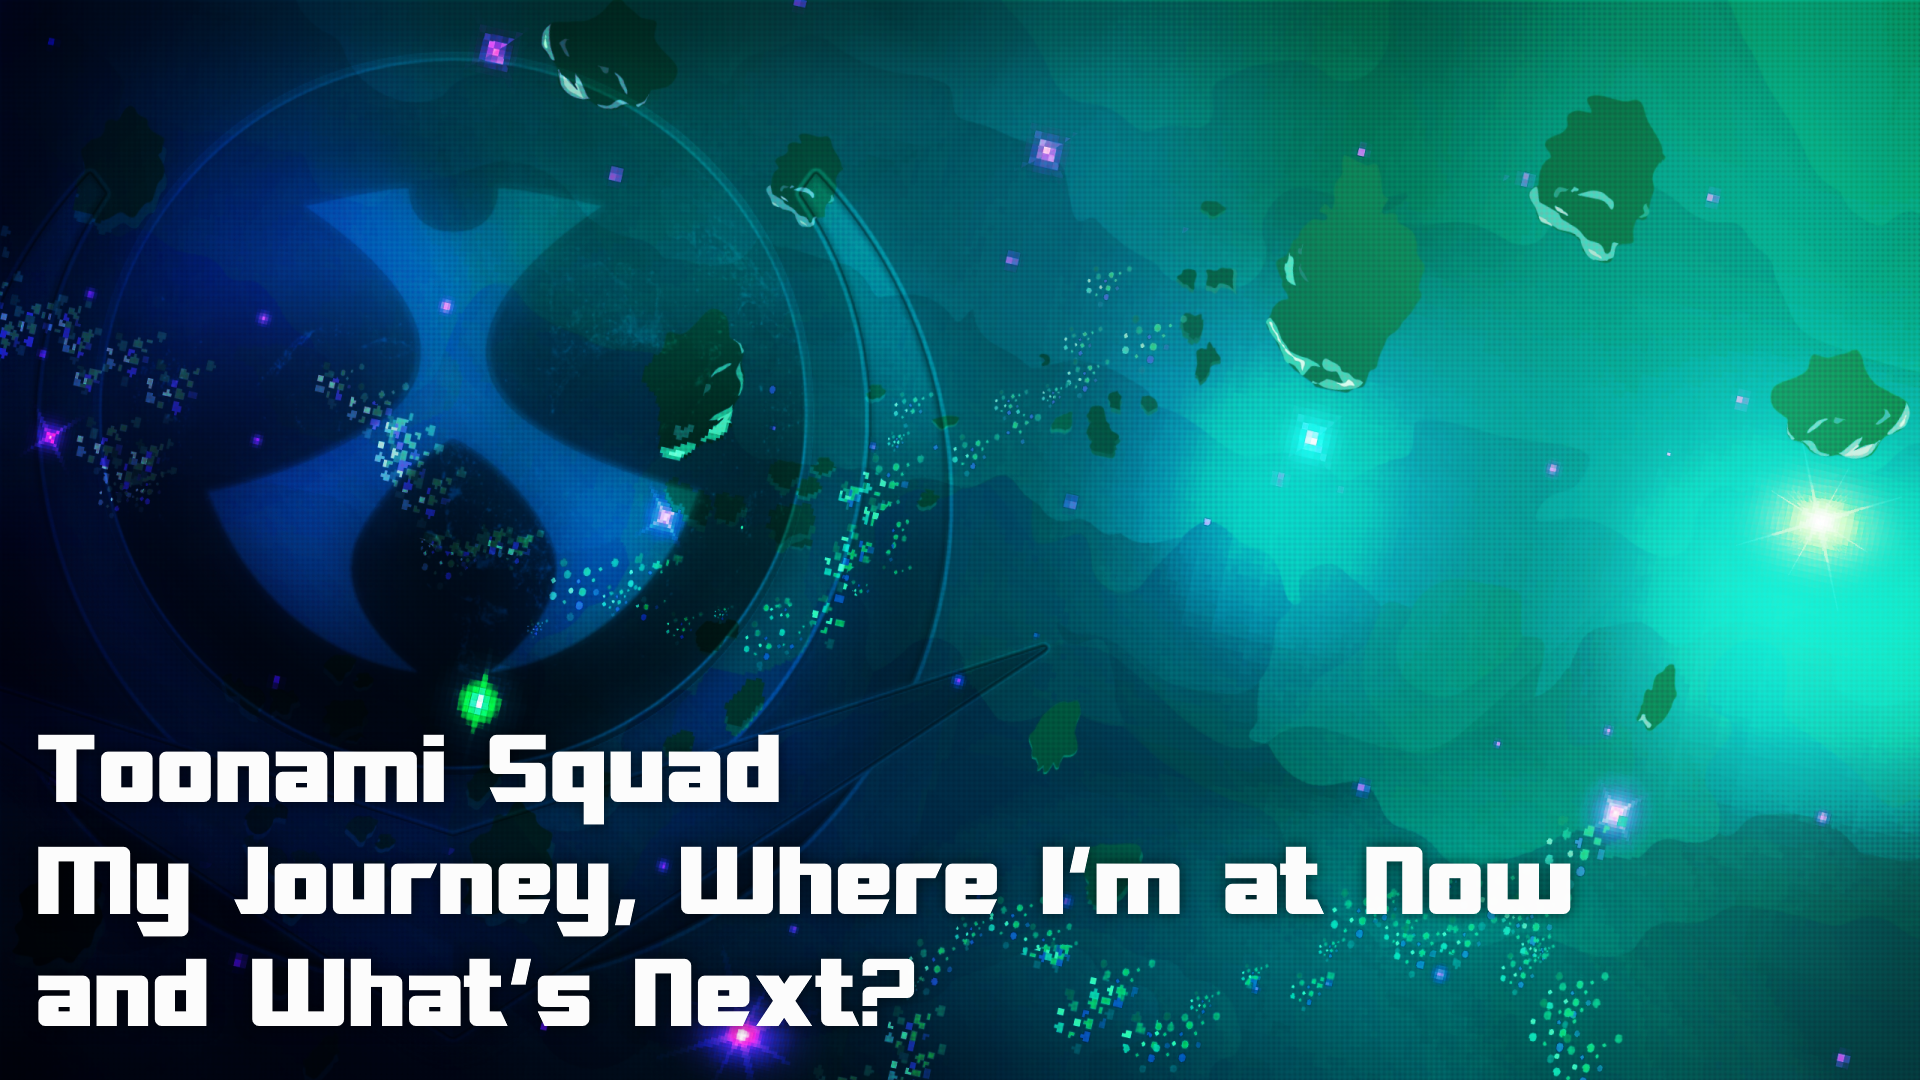 PSA: Toonami Squad, My Journey, Where I'm at Now and What's Next?